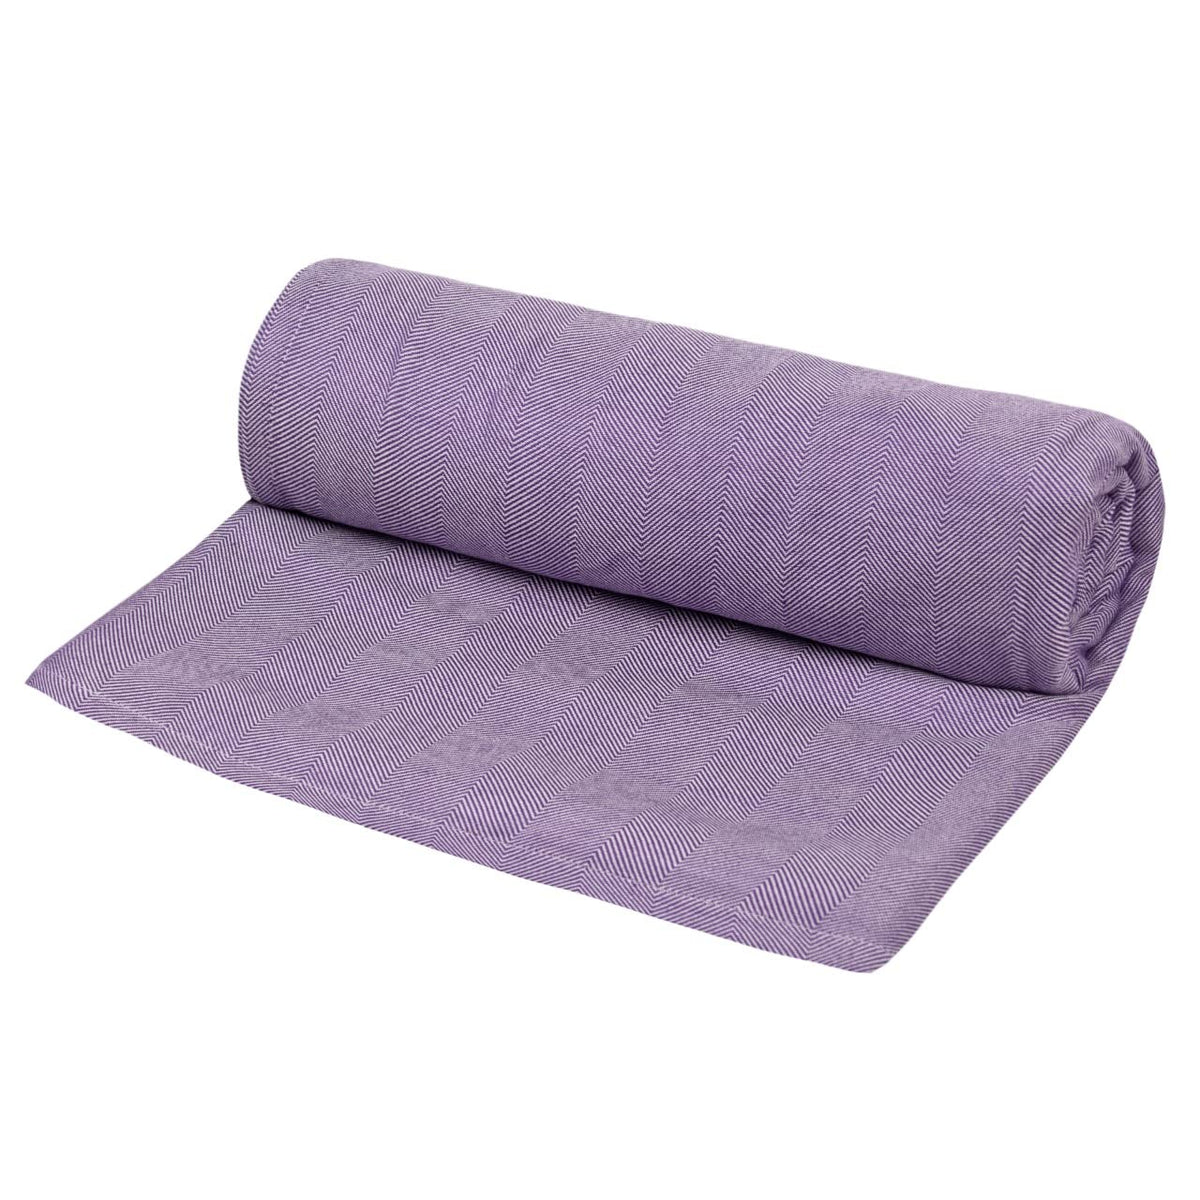 Mush Ultra-Soft, Light Weight & Thermoregulating, All Season 100% Bamboo Blanket & Dohar (Lavender, Small - 3.33 x 4.5 ft)